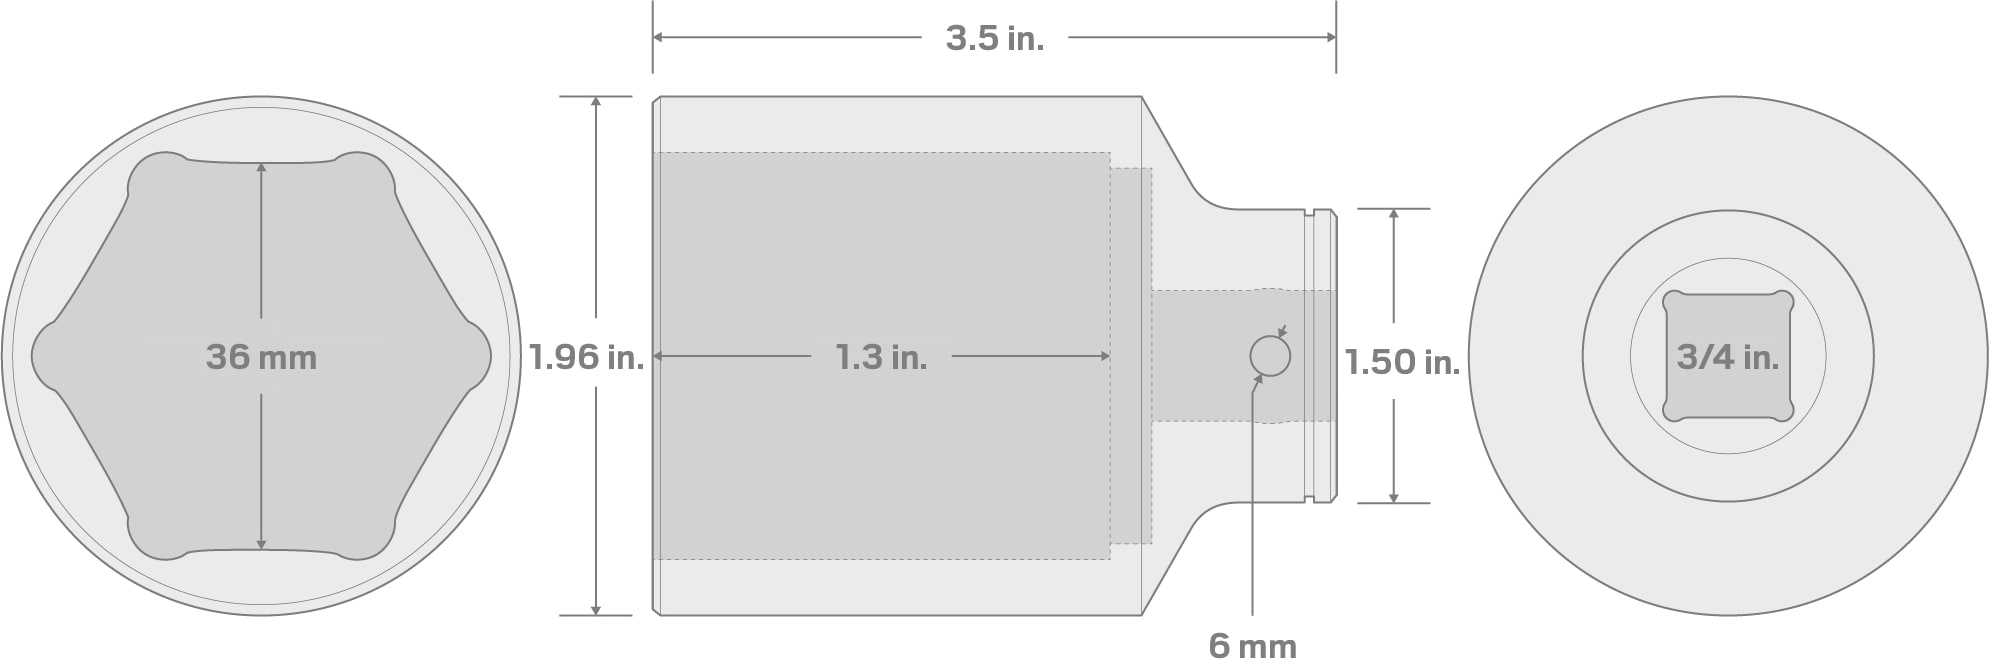 Specs for 3/4 Inch Drive x 36 mm Deep 6-Point Socket